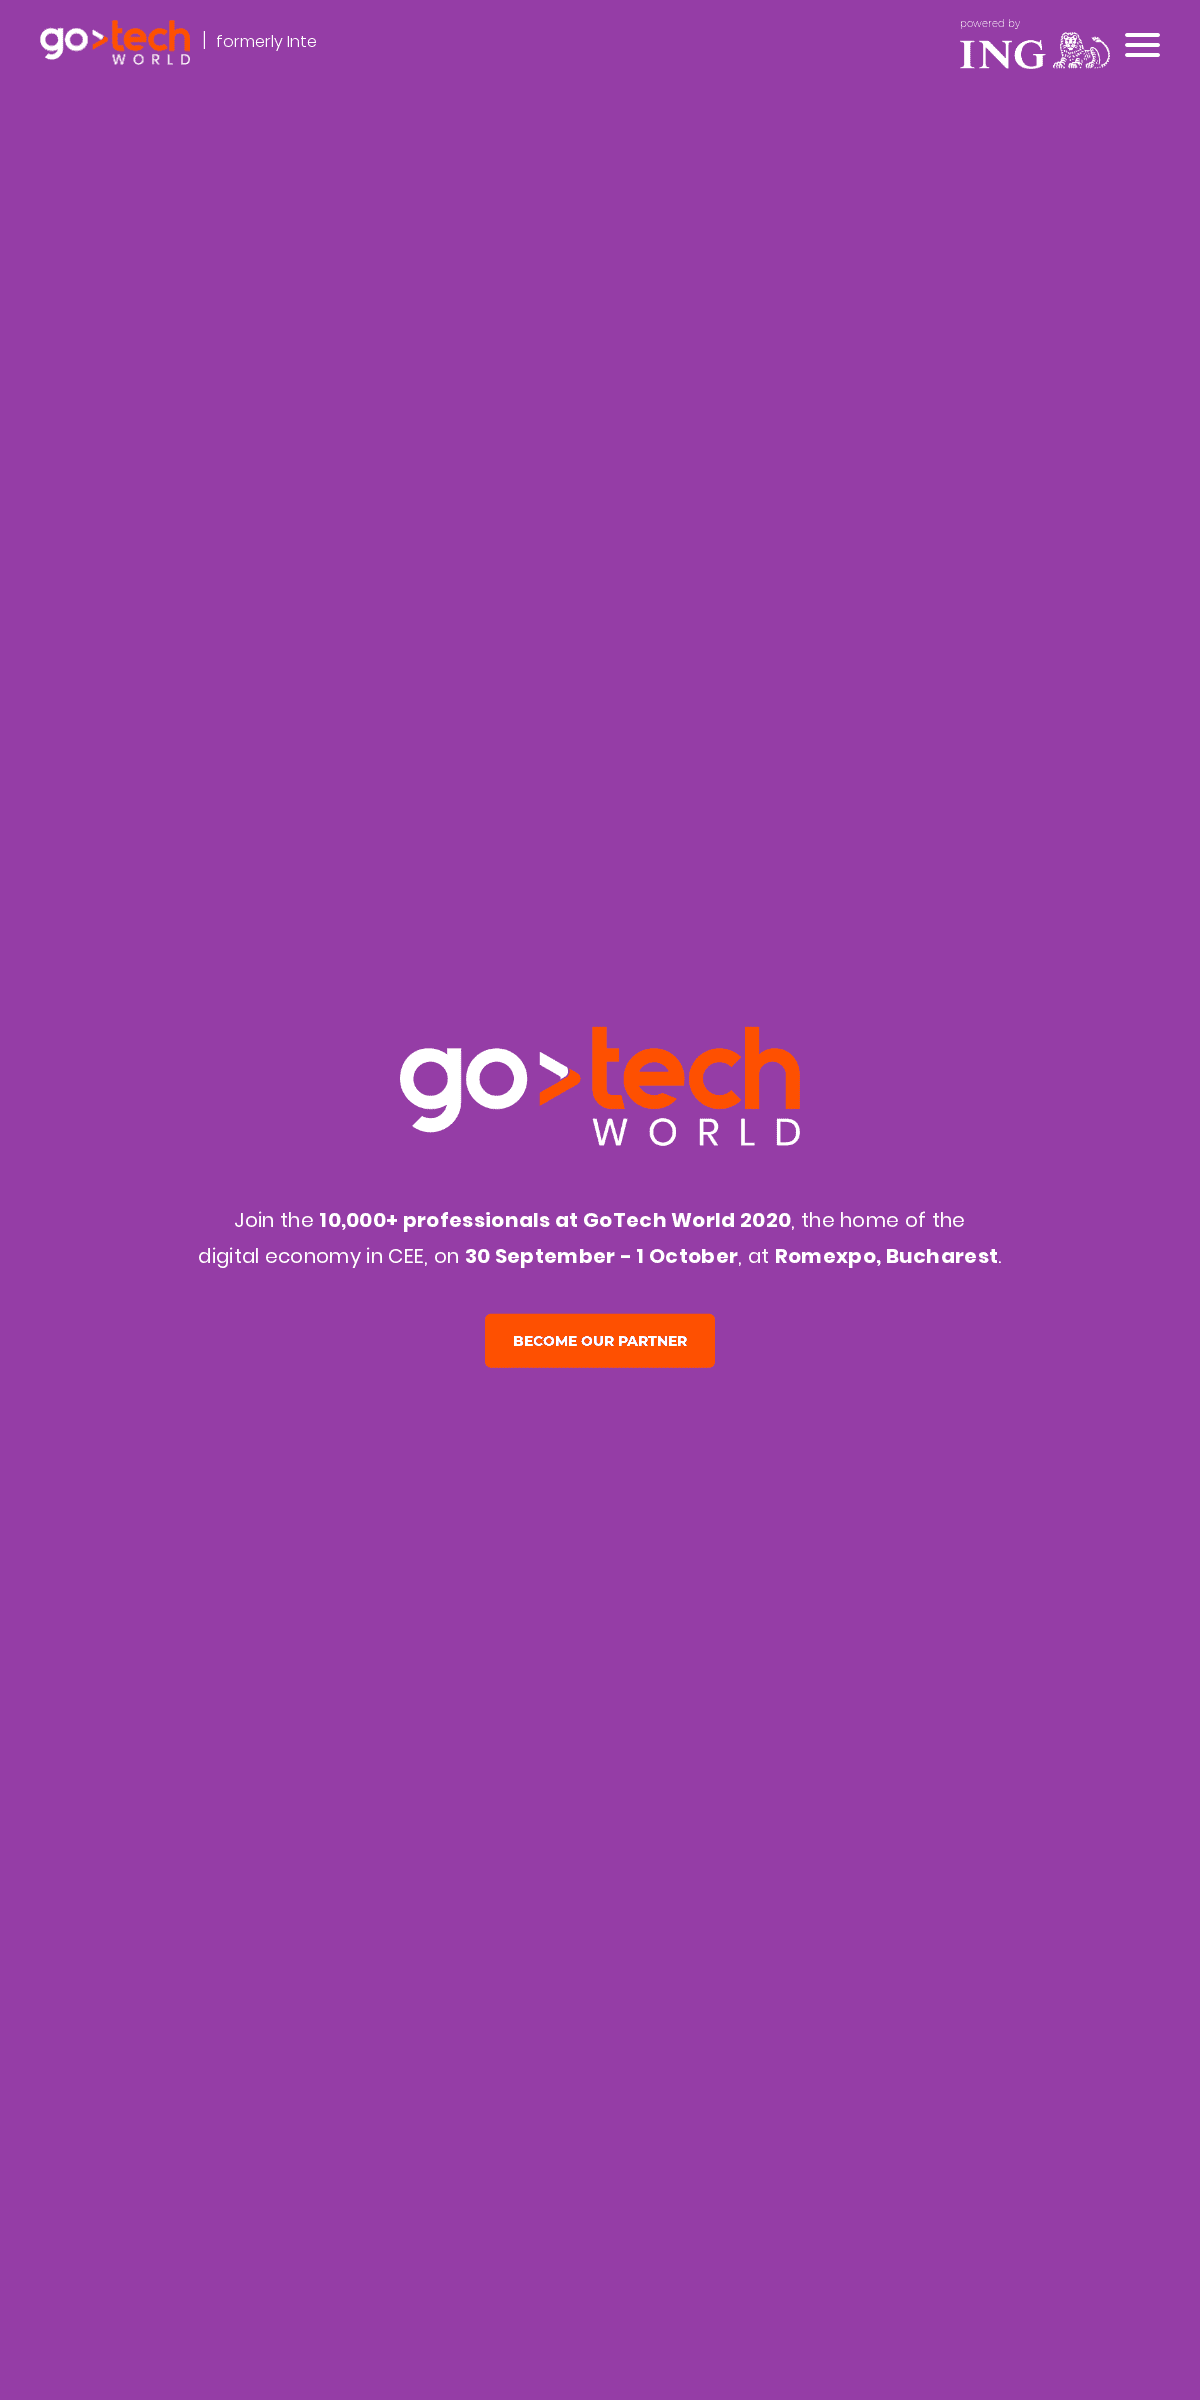 A complete backup of gotech.world